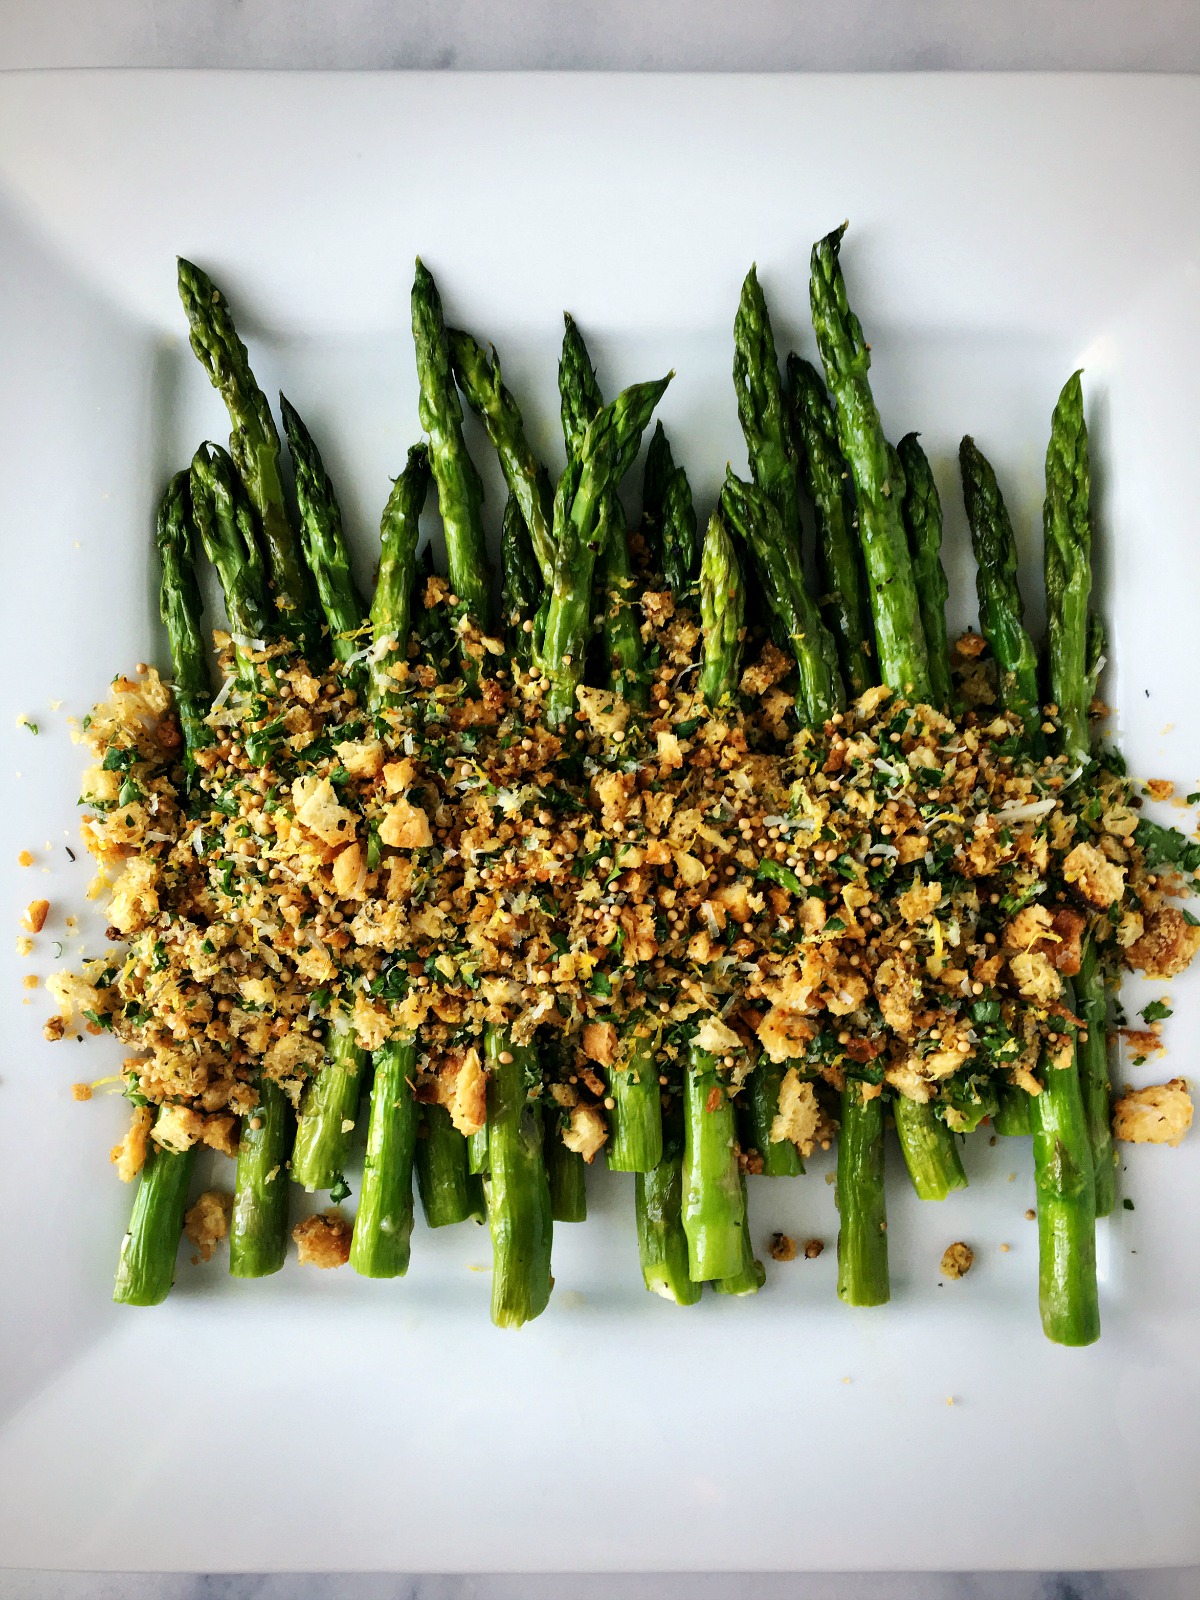 Mustard Roasted Asparagus With Breadcrumbs And Herbs - Spread the Mustard